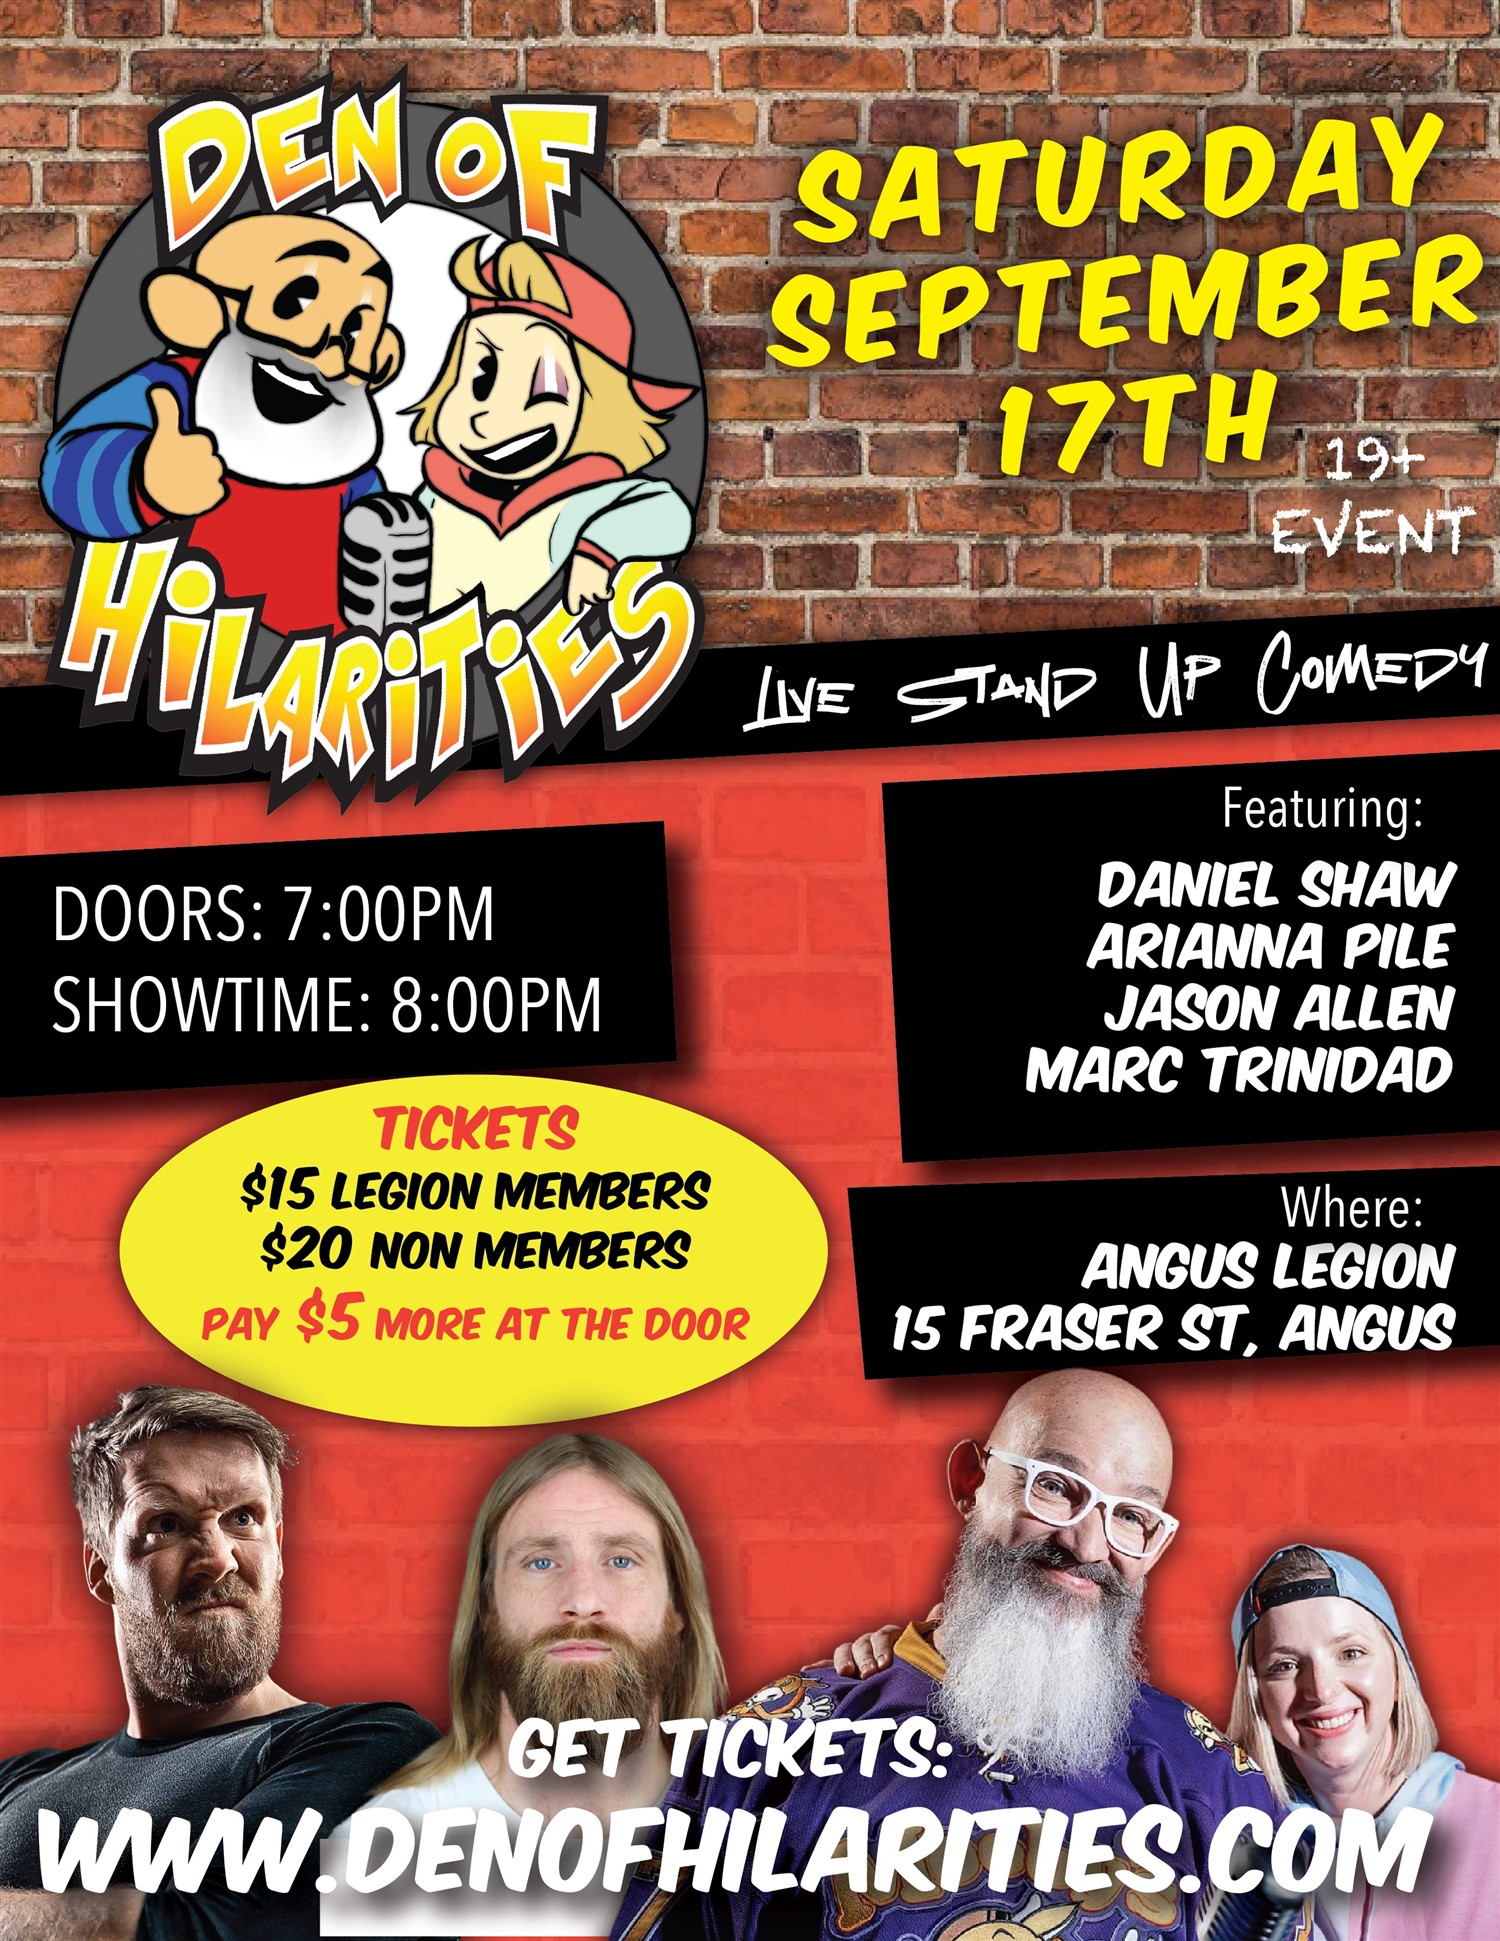 Angus Legion Comedy Show  on sep. 17, 20:00@Angus Legion Hall - Buy tickets and Get information on Marc Trinidad Ent 